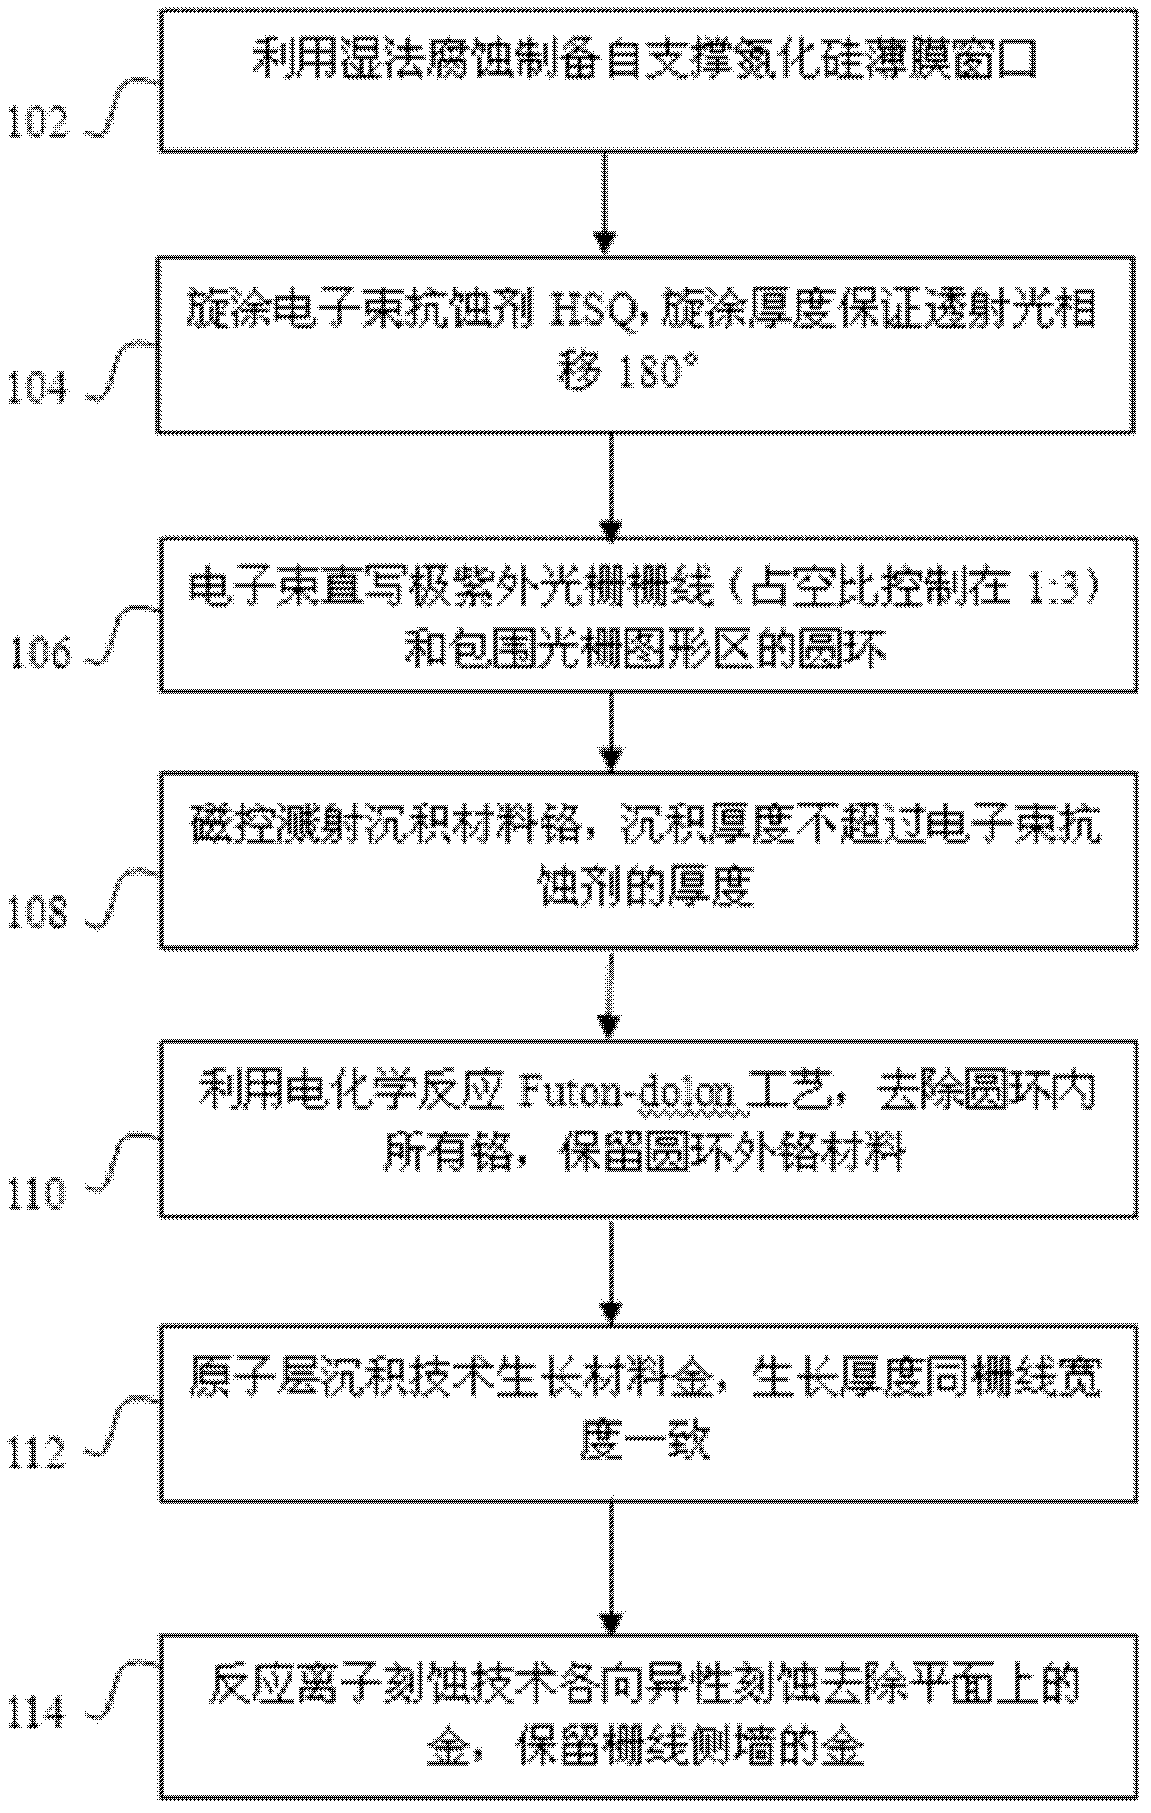 Sub-wavelength extreme ultraviolet metal transmission grating and manufacture method thereof